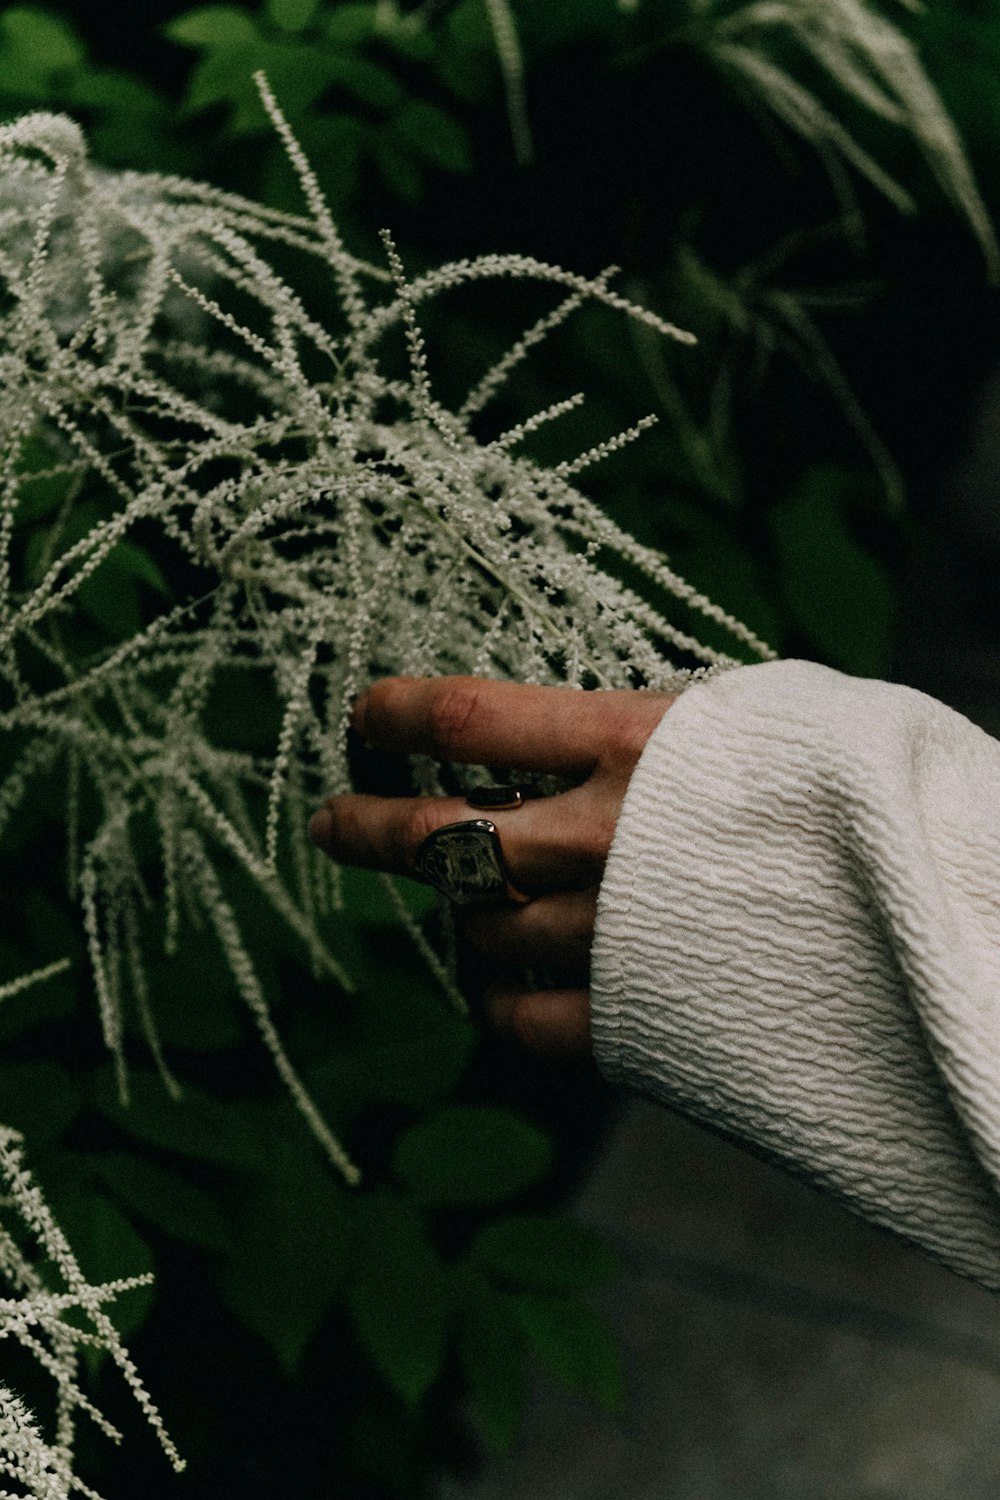 a hand holding a small white flower